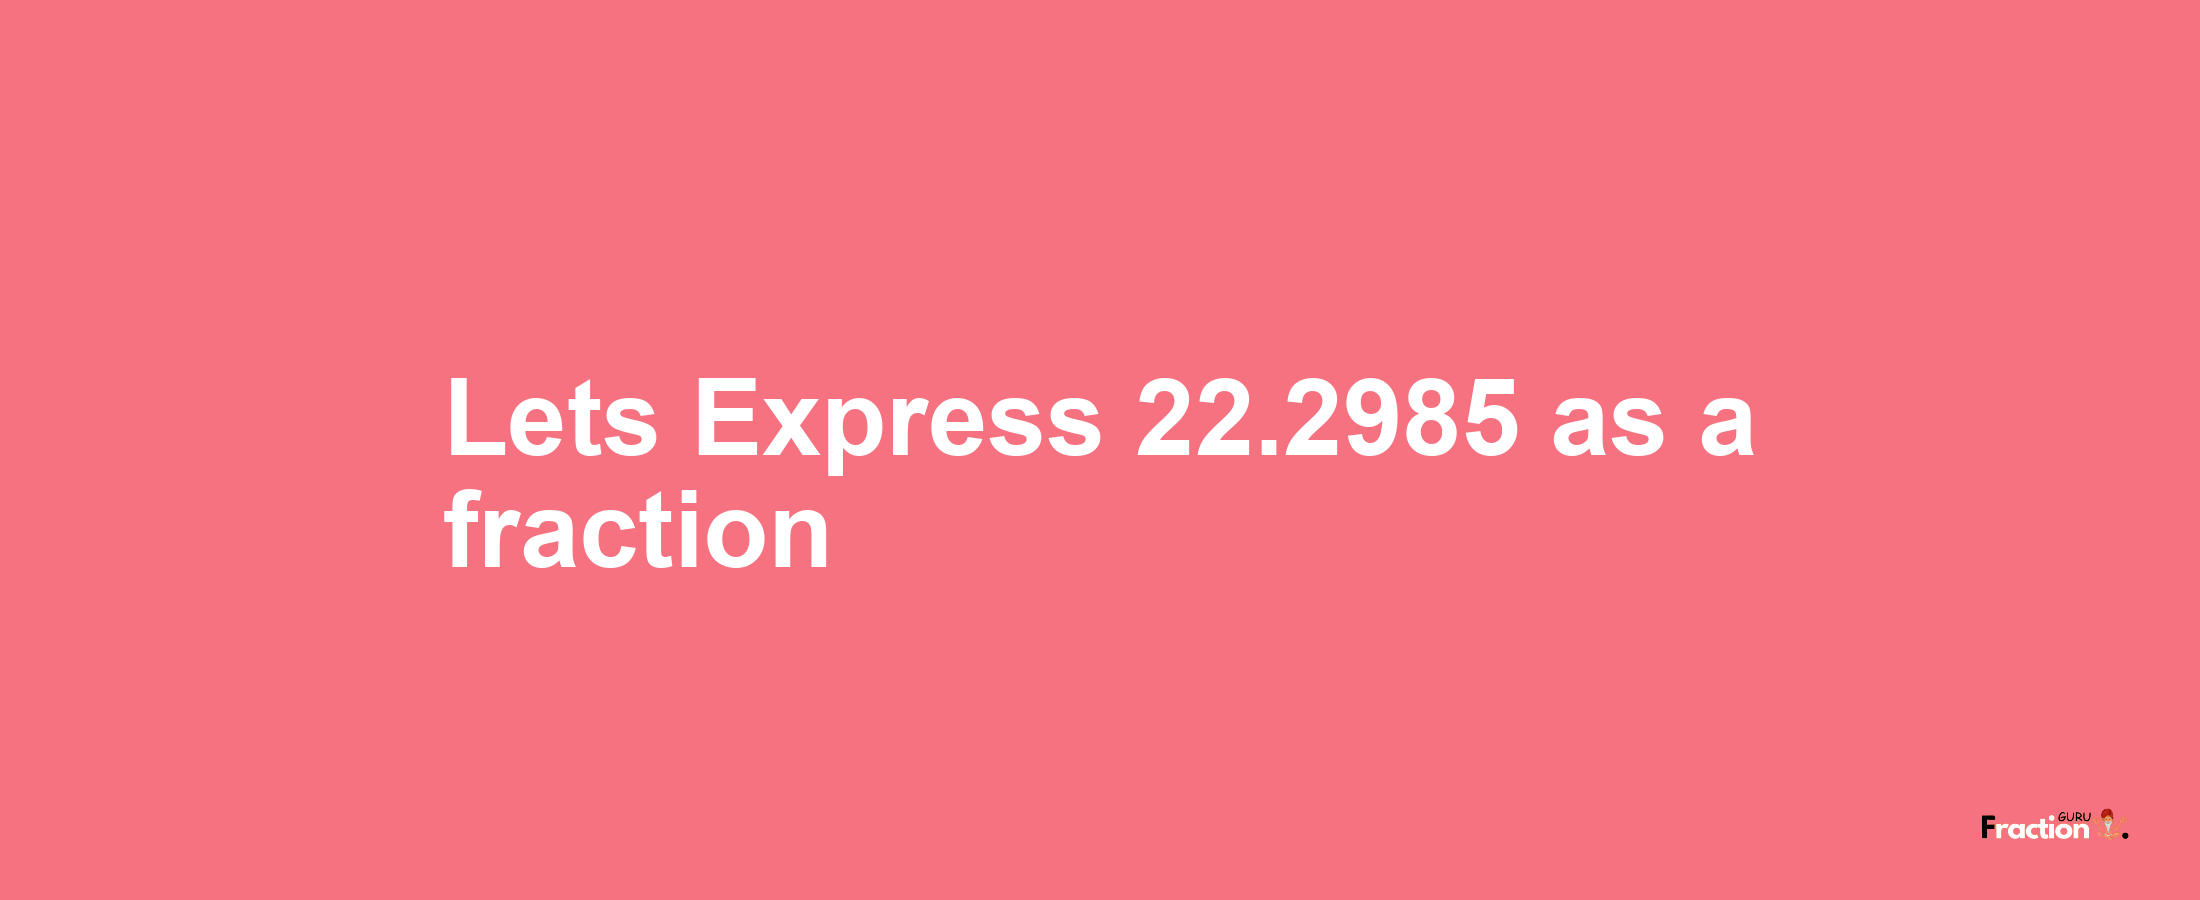 Lets Express 22.2985 as afraction